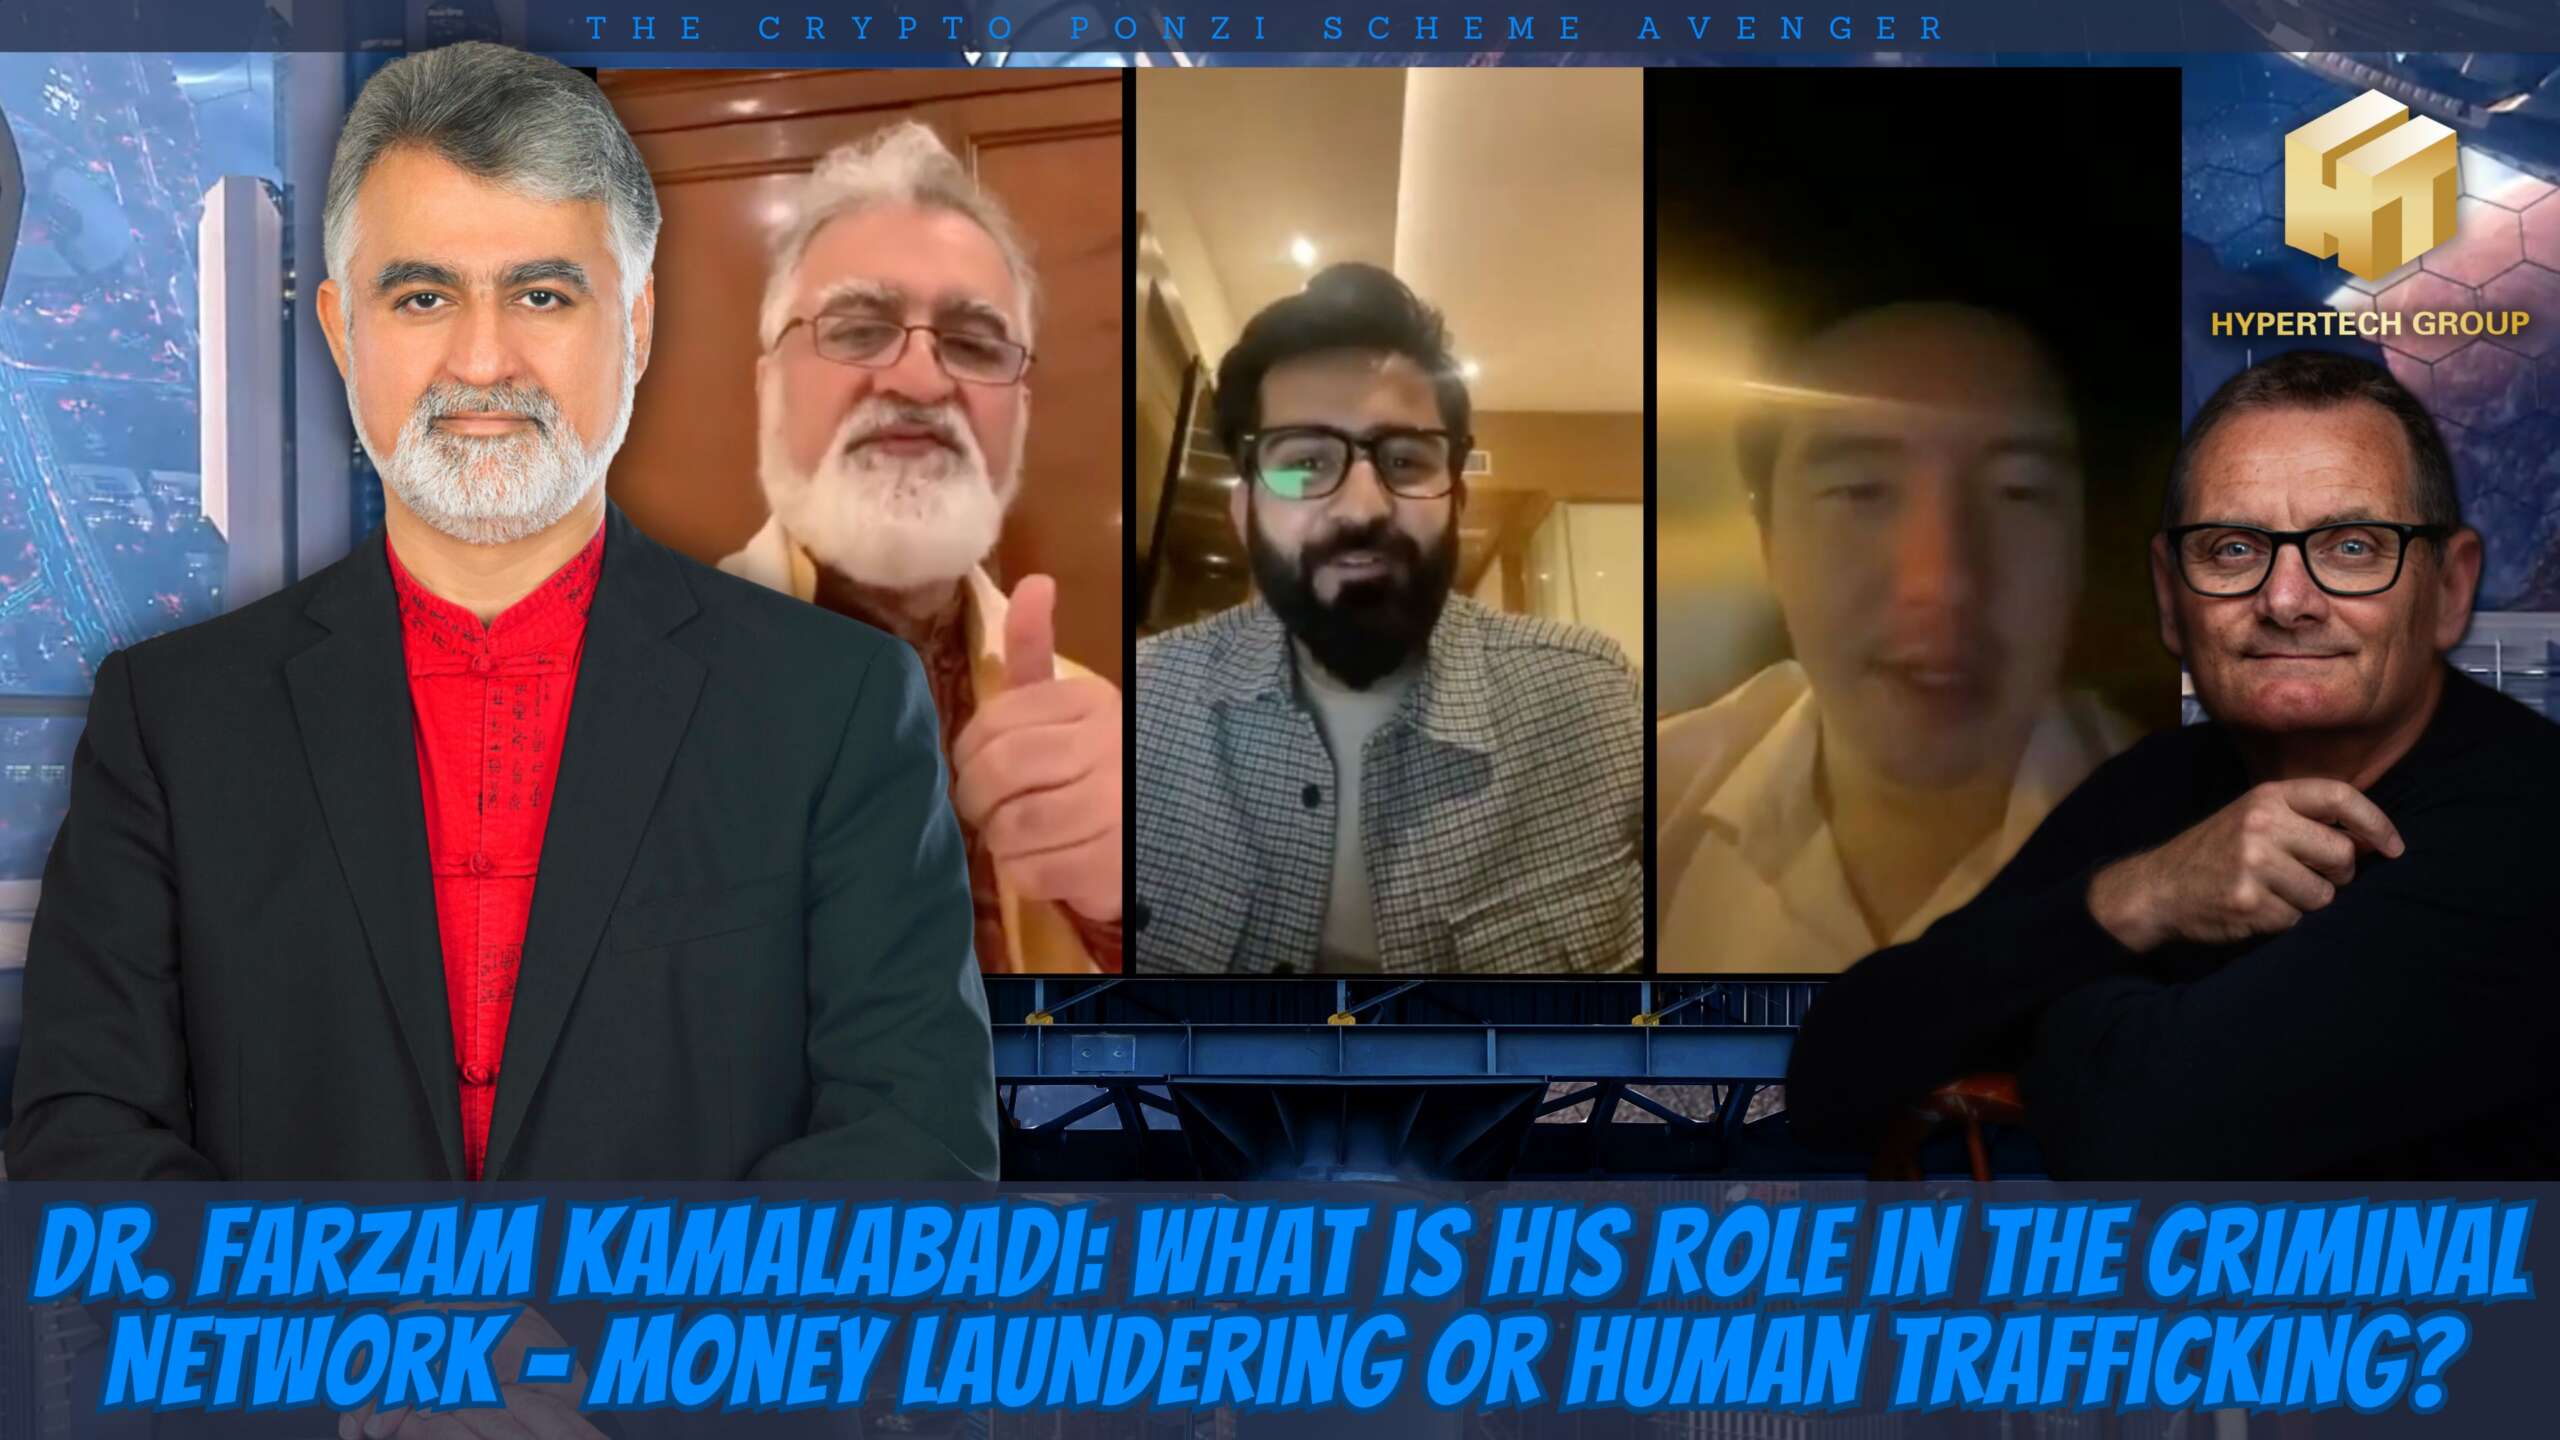 Dr. Farzam Kamalabadi: What is His Role in the Criminal Network, Money Laundering or Human Trafficking?